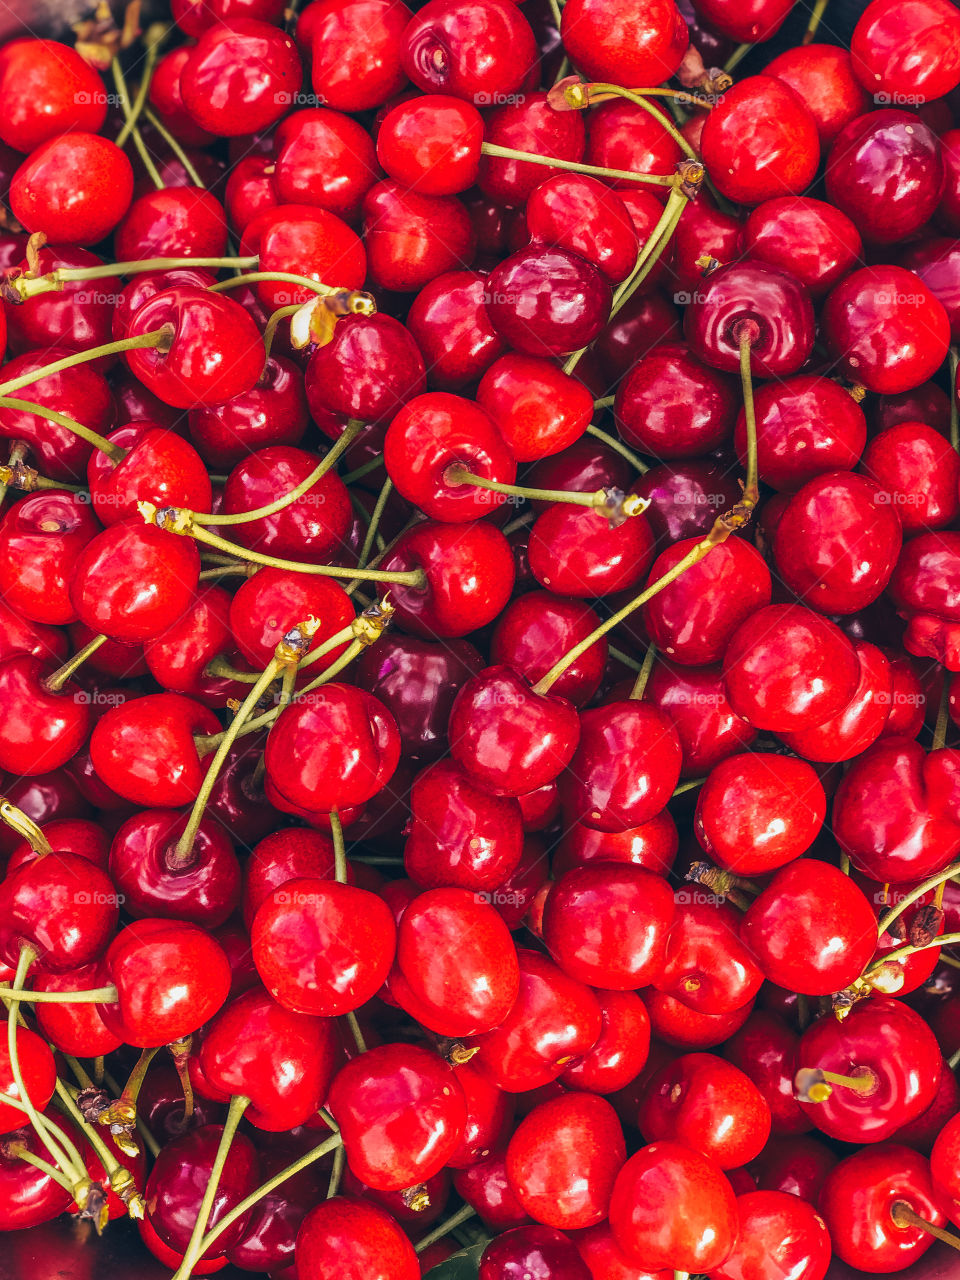 Background of a lot of cherries